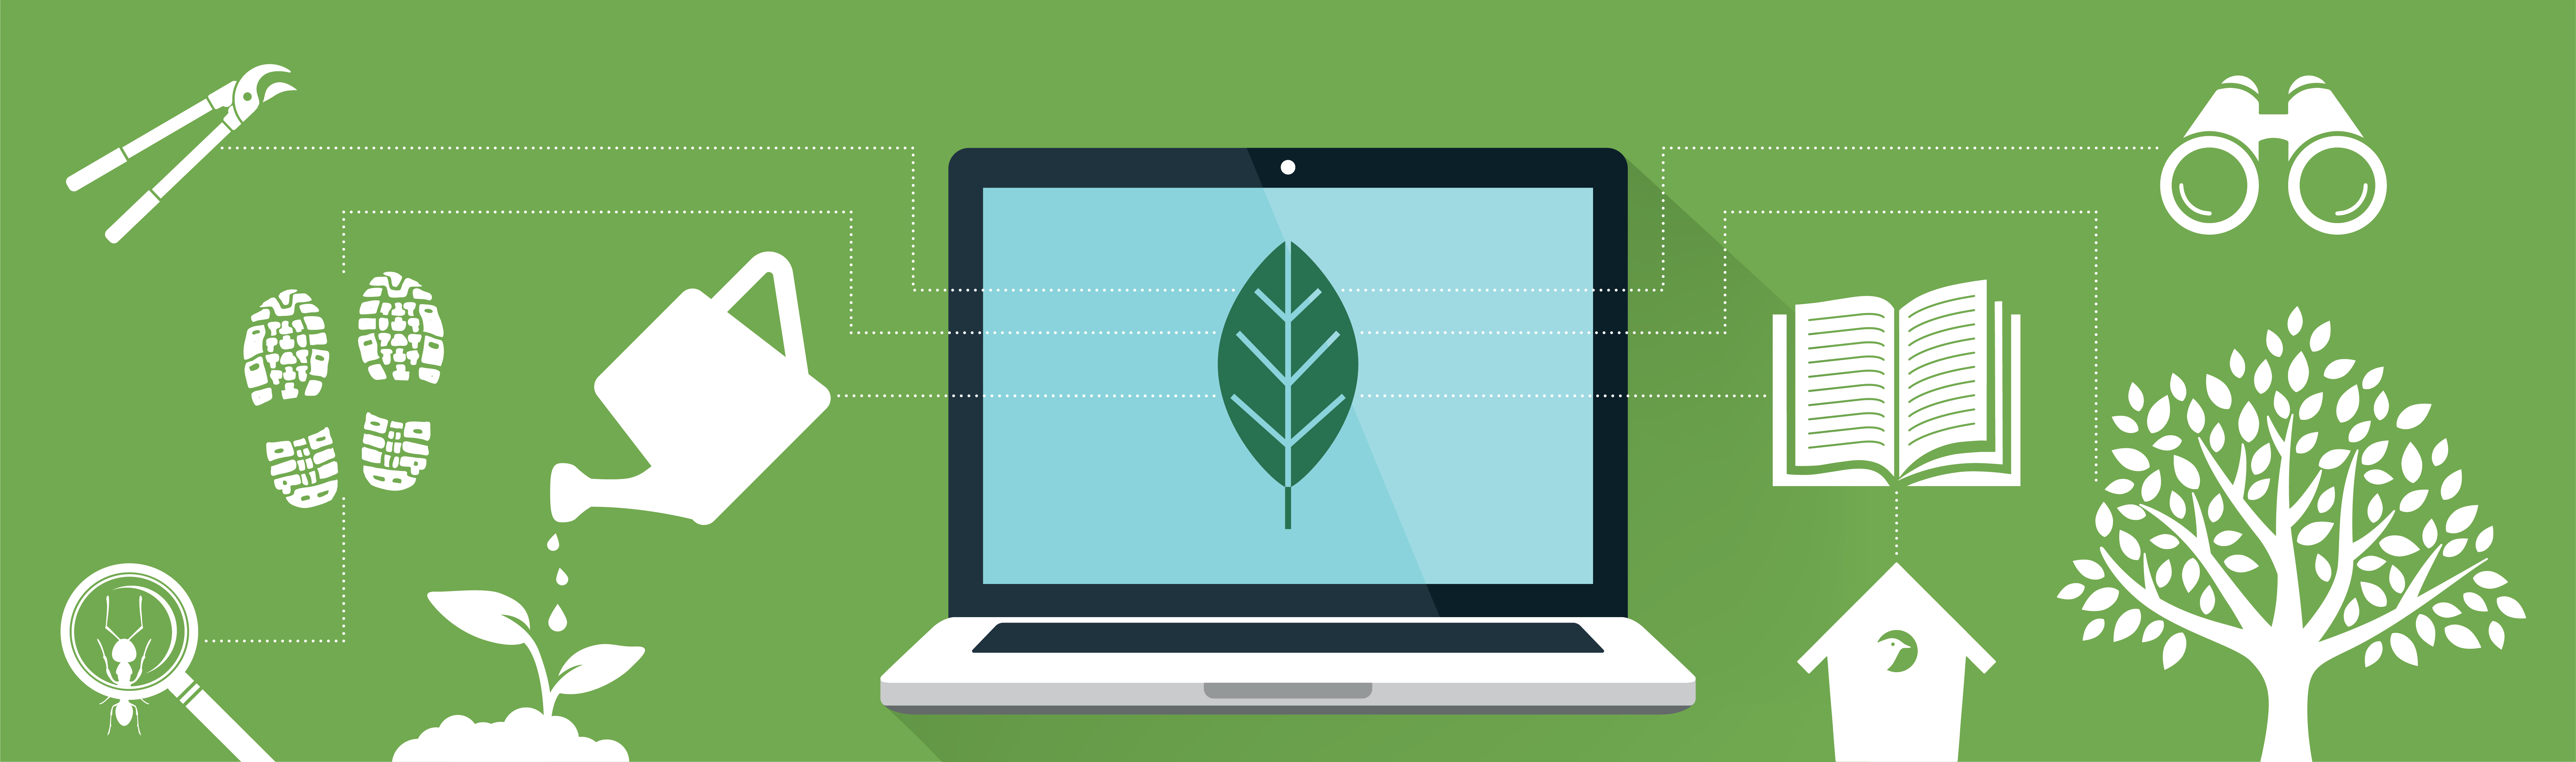 Learn Online - graphic of laptop on green background with Nature Center leaf icon on the screen. Icons of topics to learn are floating around the laptop on green background.